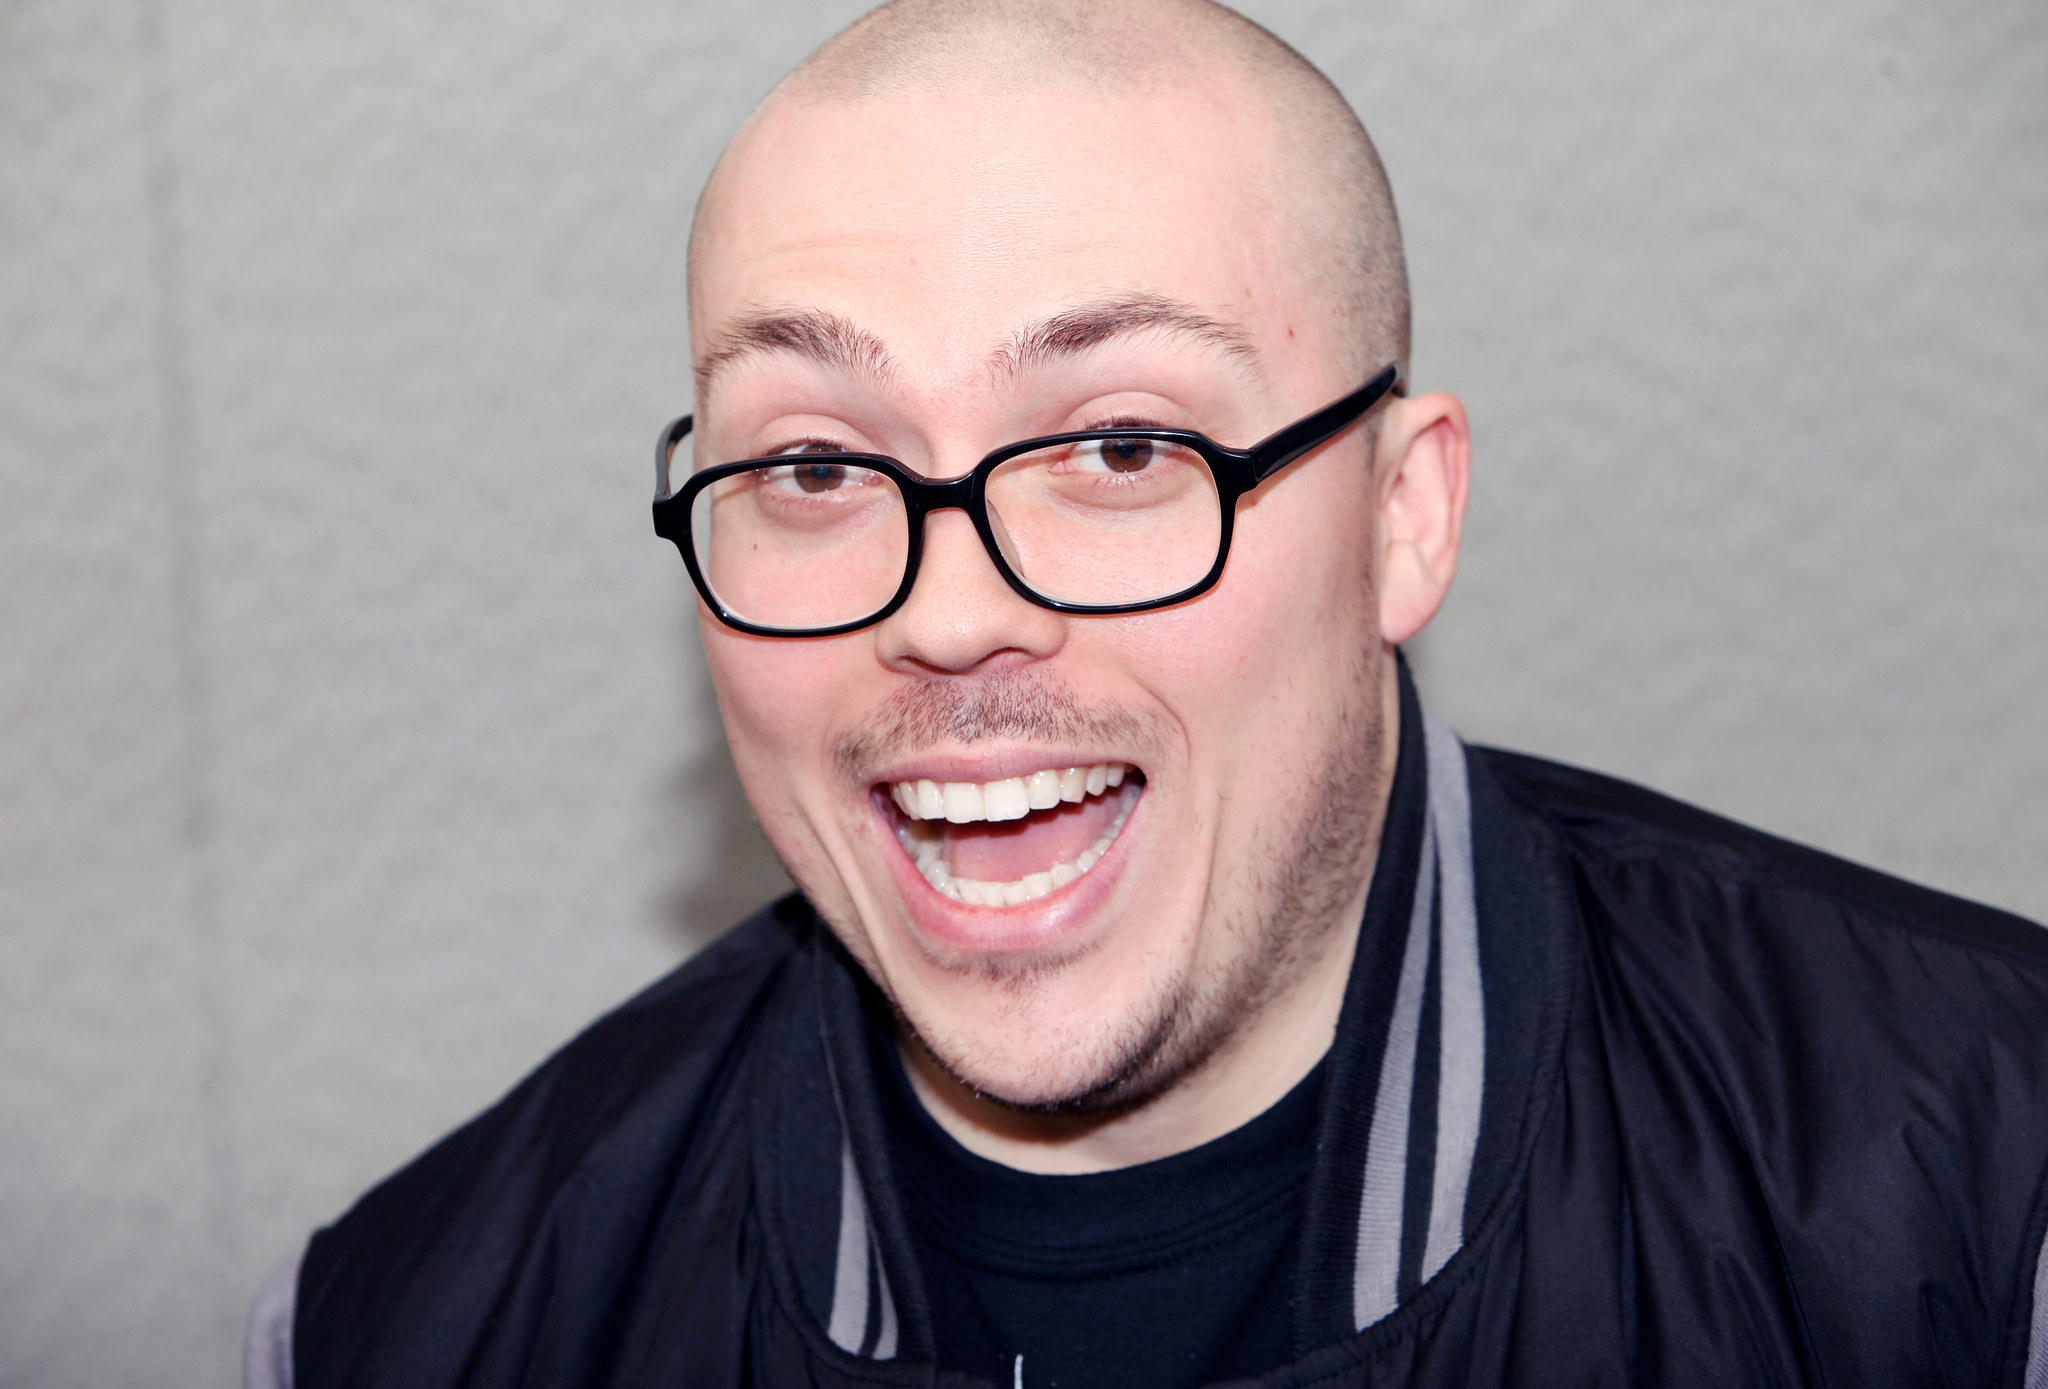 Anthony Fantano is a well-known music reviewer who has been writing reviews for more than a decade. On his YouTube channel, which has over two million subscribers, he expresses himself openly.